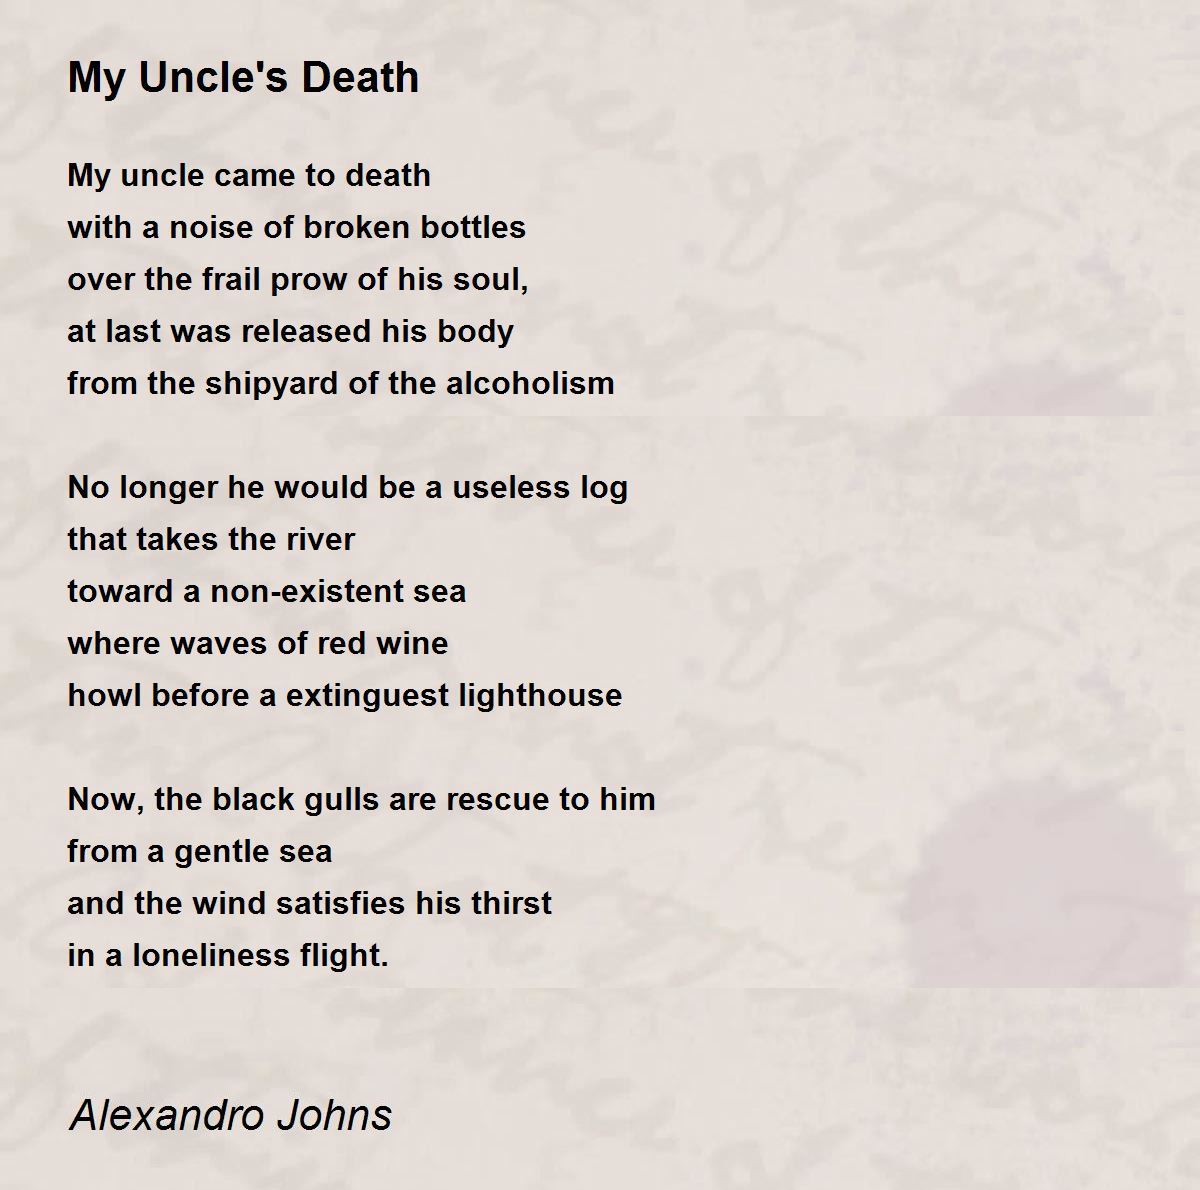 death of my uncle essay